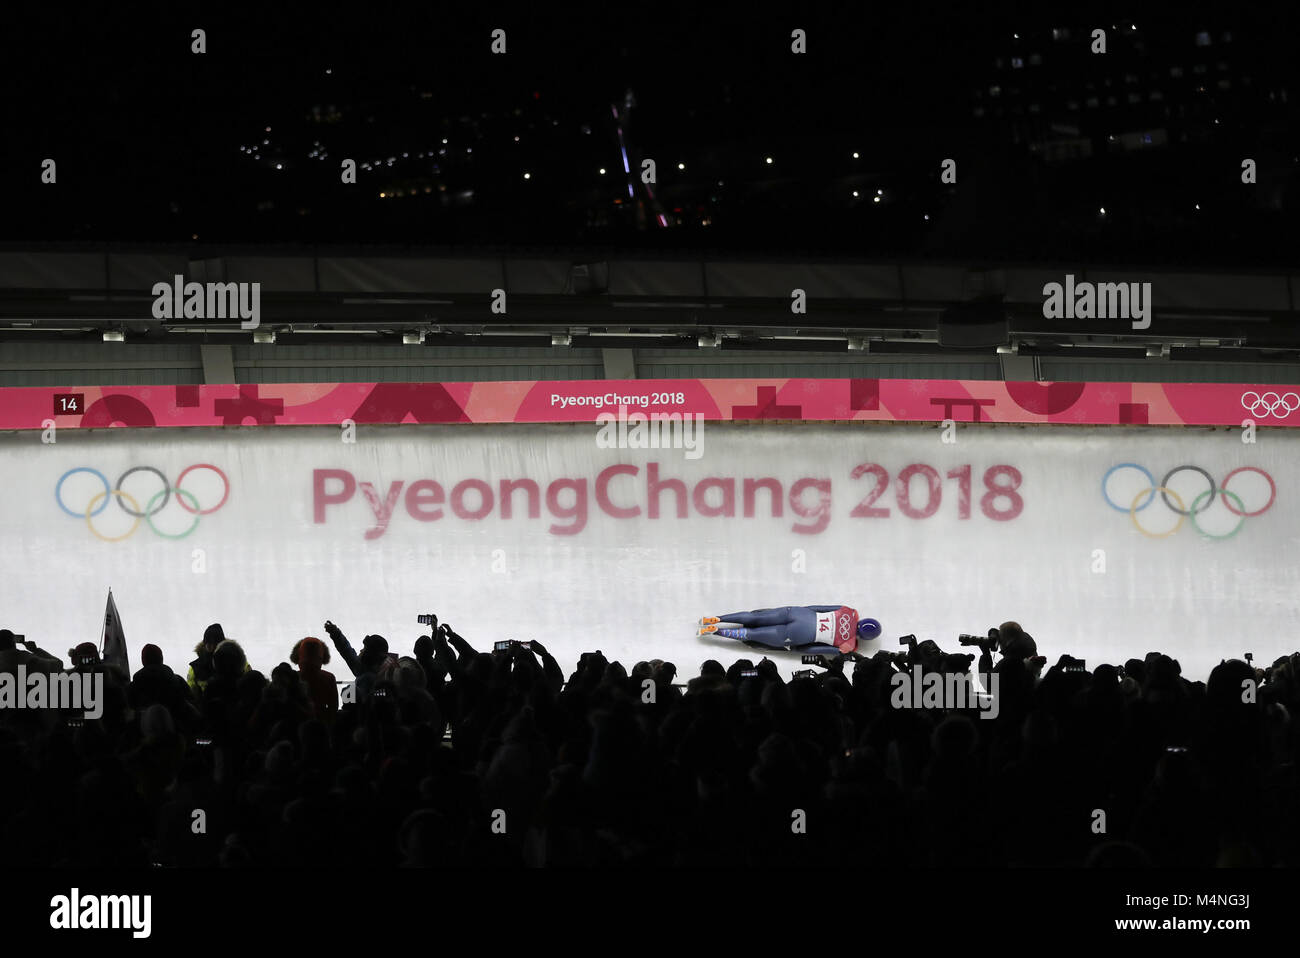 Pyeongchang, South Korea. 17th Feb, 2018. Britain's Lizzy Yarnold competes during women event of skeleton at 2018 PyeongChang Winter Olympic Games at Olympic Sliding Centre, PyeongChang, South Korea, Feb. 17, 2018. Lizzy Yarnold claimed Champion in a time of 3:27.28. Credit: Bai Xuefei/Xinhua/Alamy Live News Stock Photo